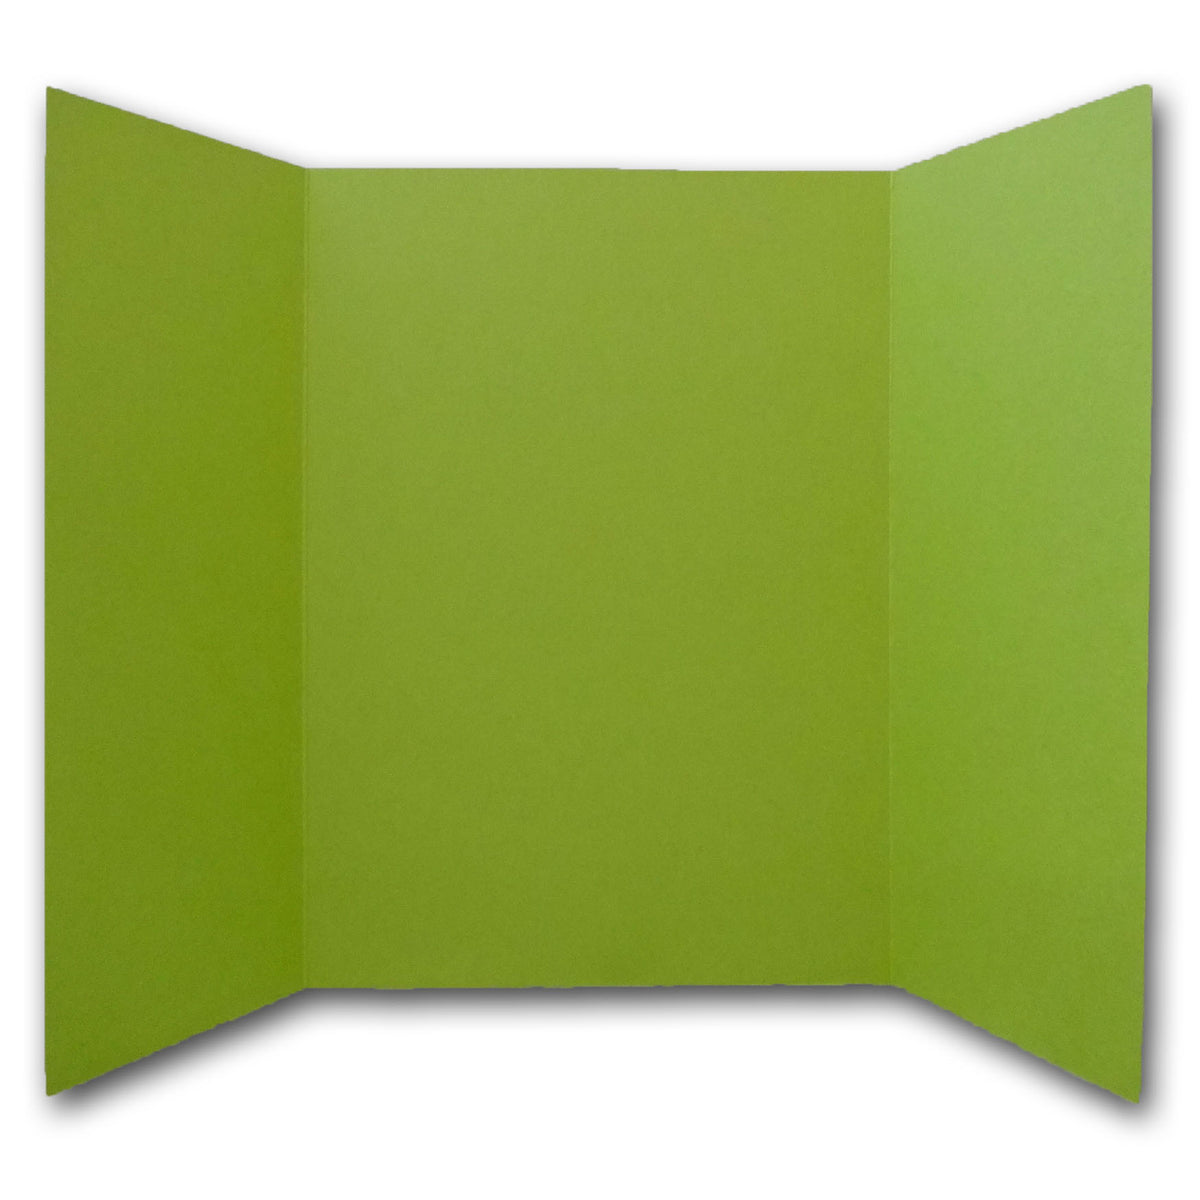 Apple Green 5x7 Gate Fold Discount Card Stock for DIY Invitations